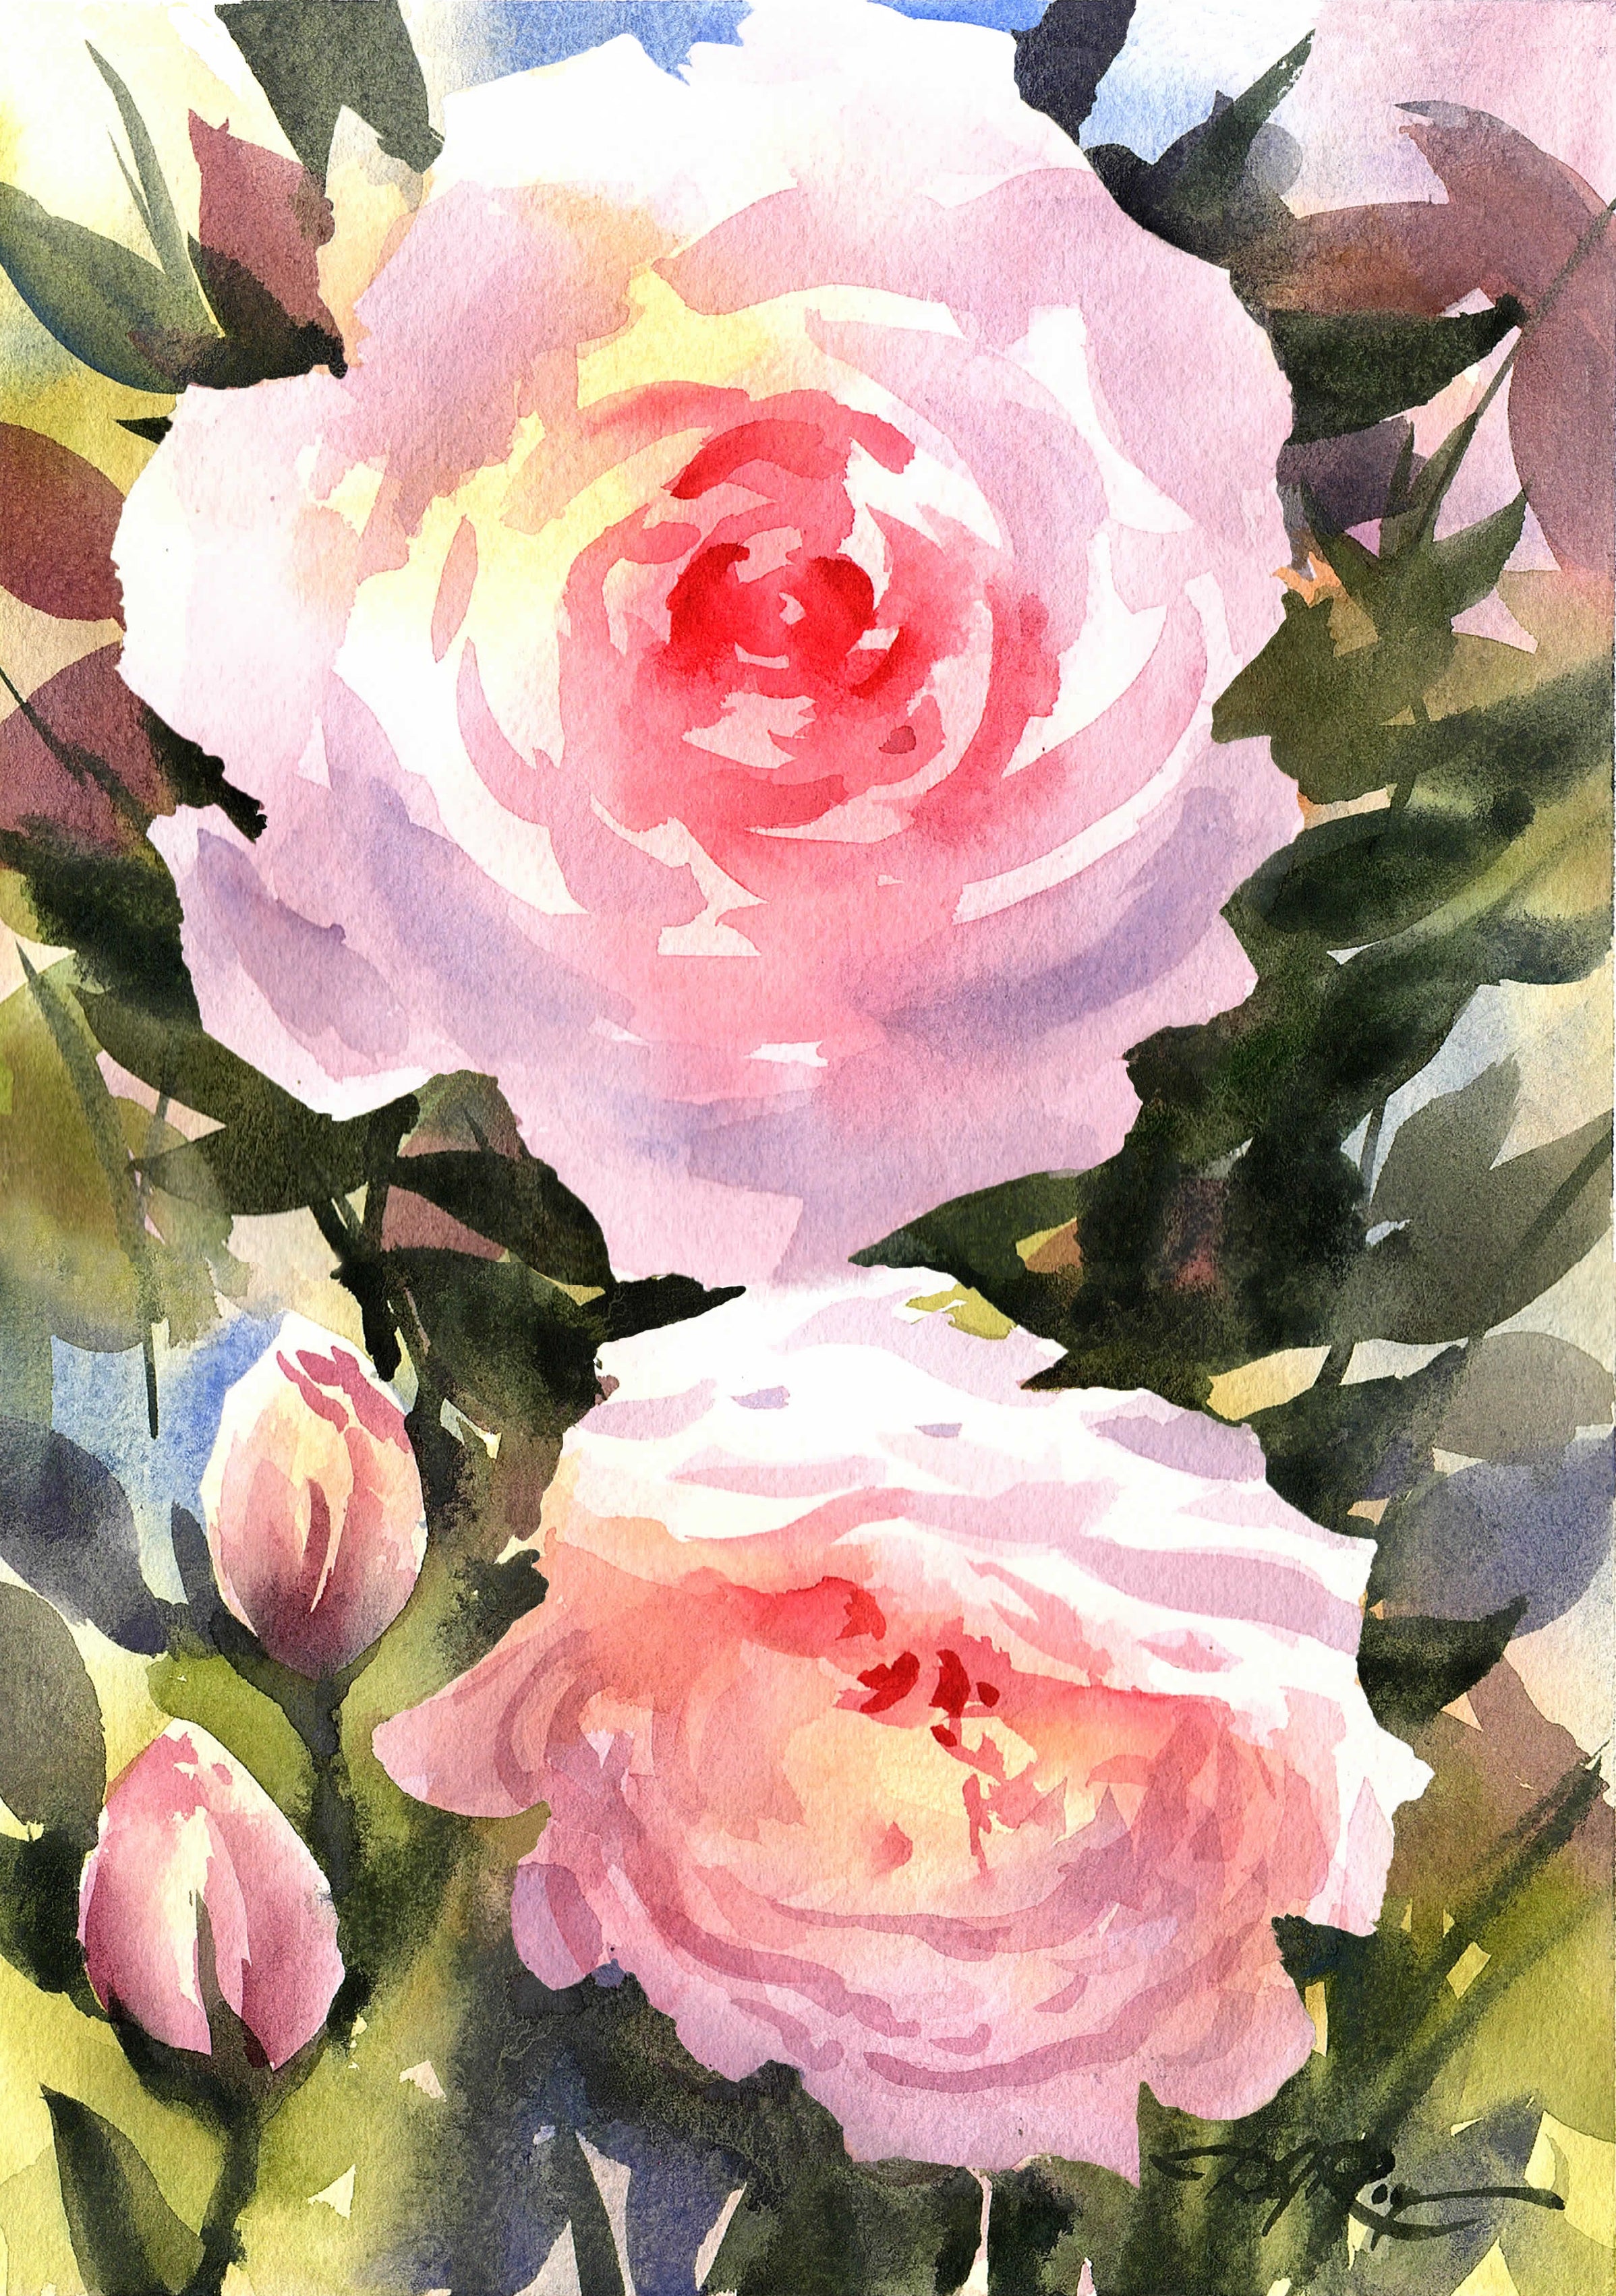 Putting Together My Rosa Gallery Watercolour Paint Palette, with